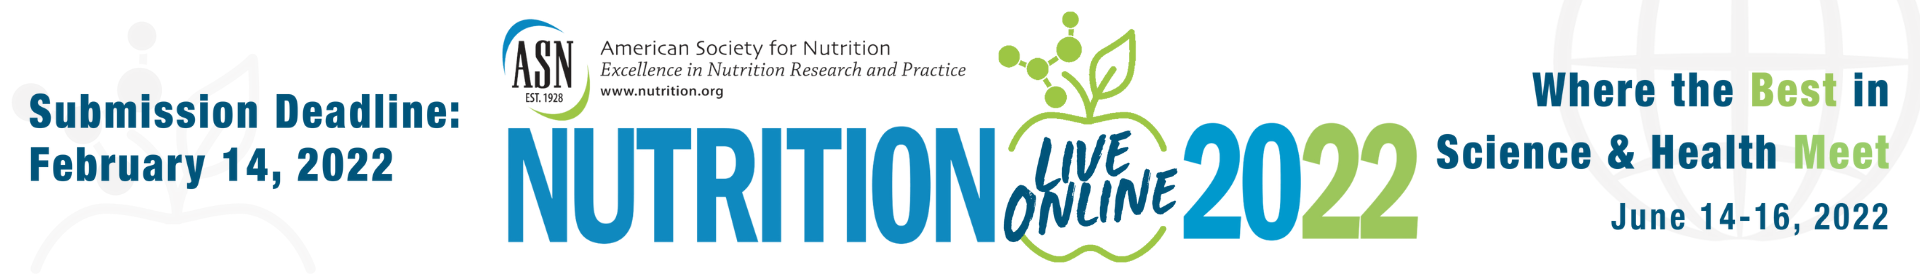 NUTRITION 2022 LIVE ONLINE Abstract Submission Event Banner